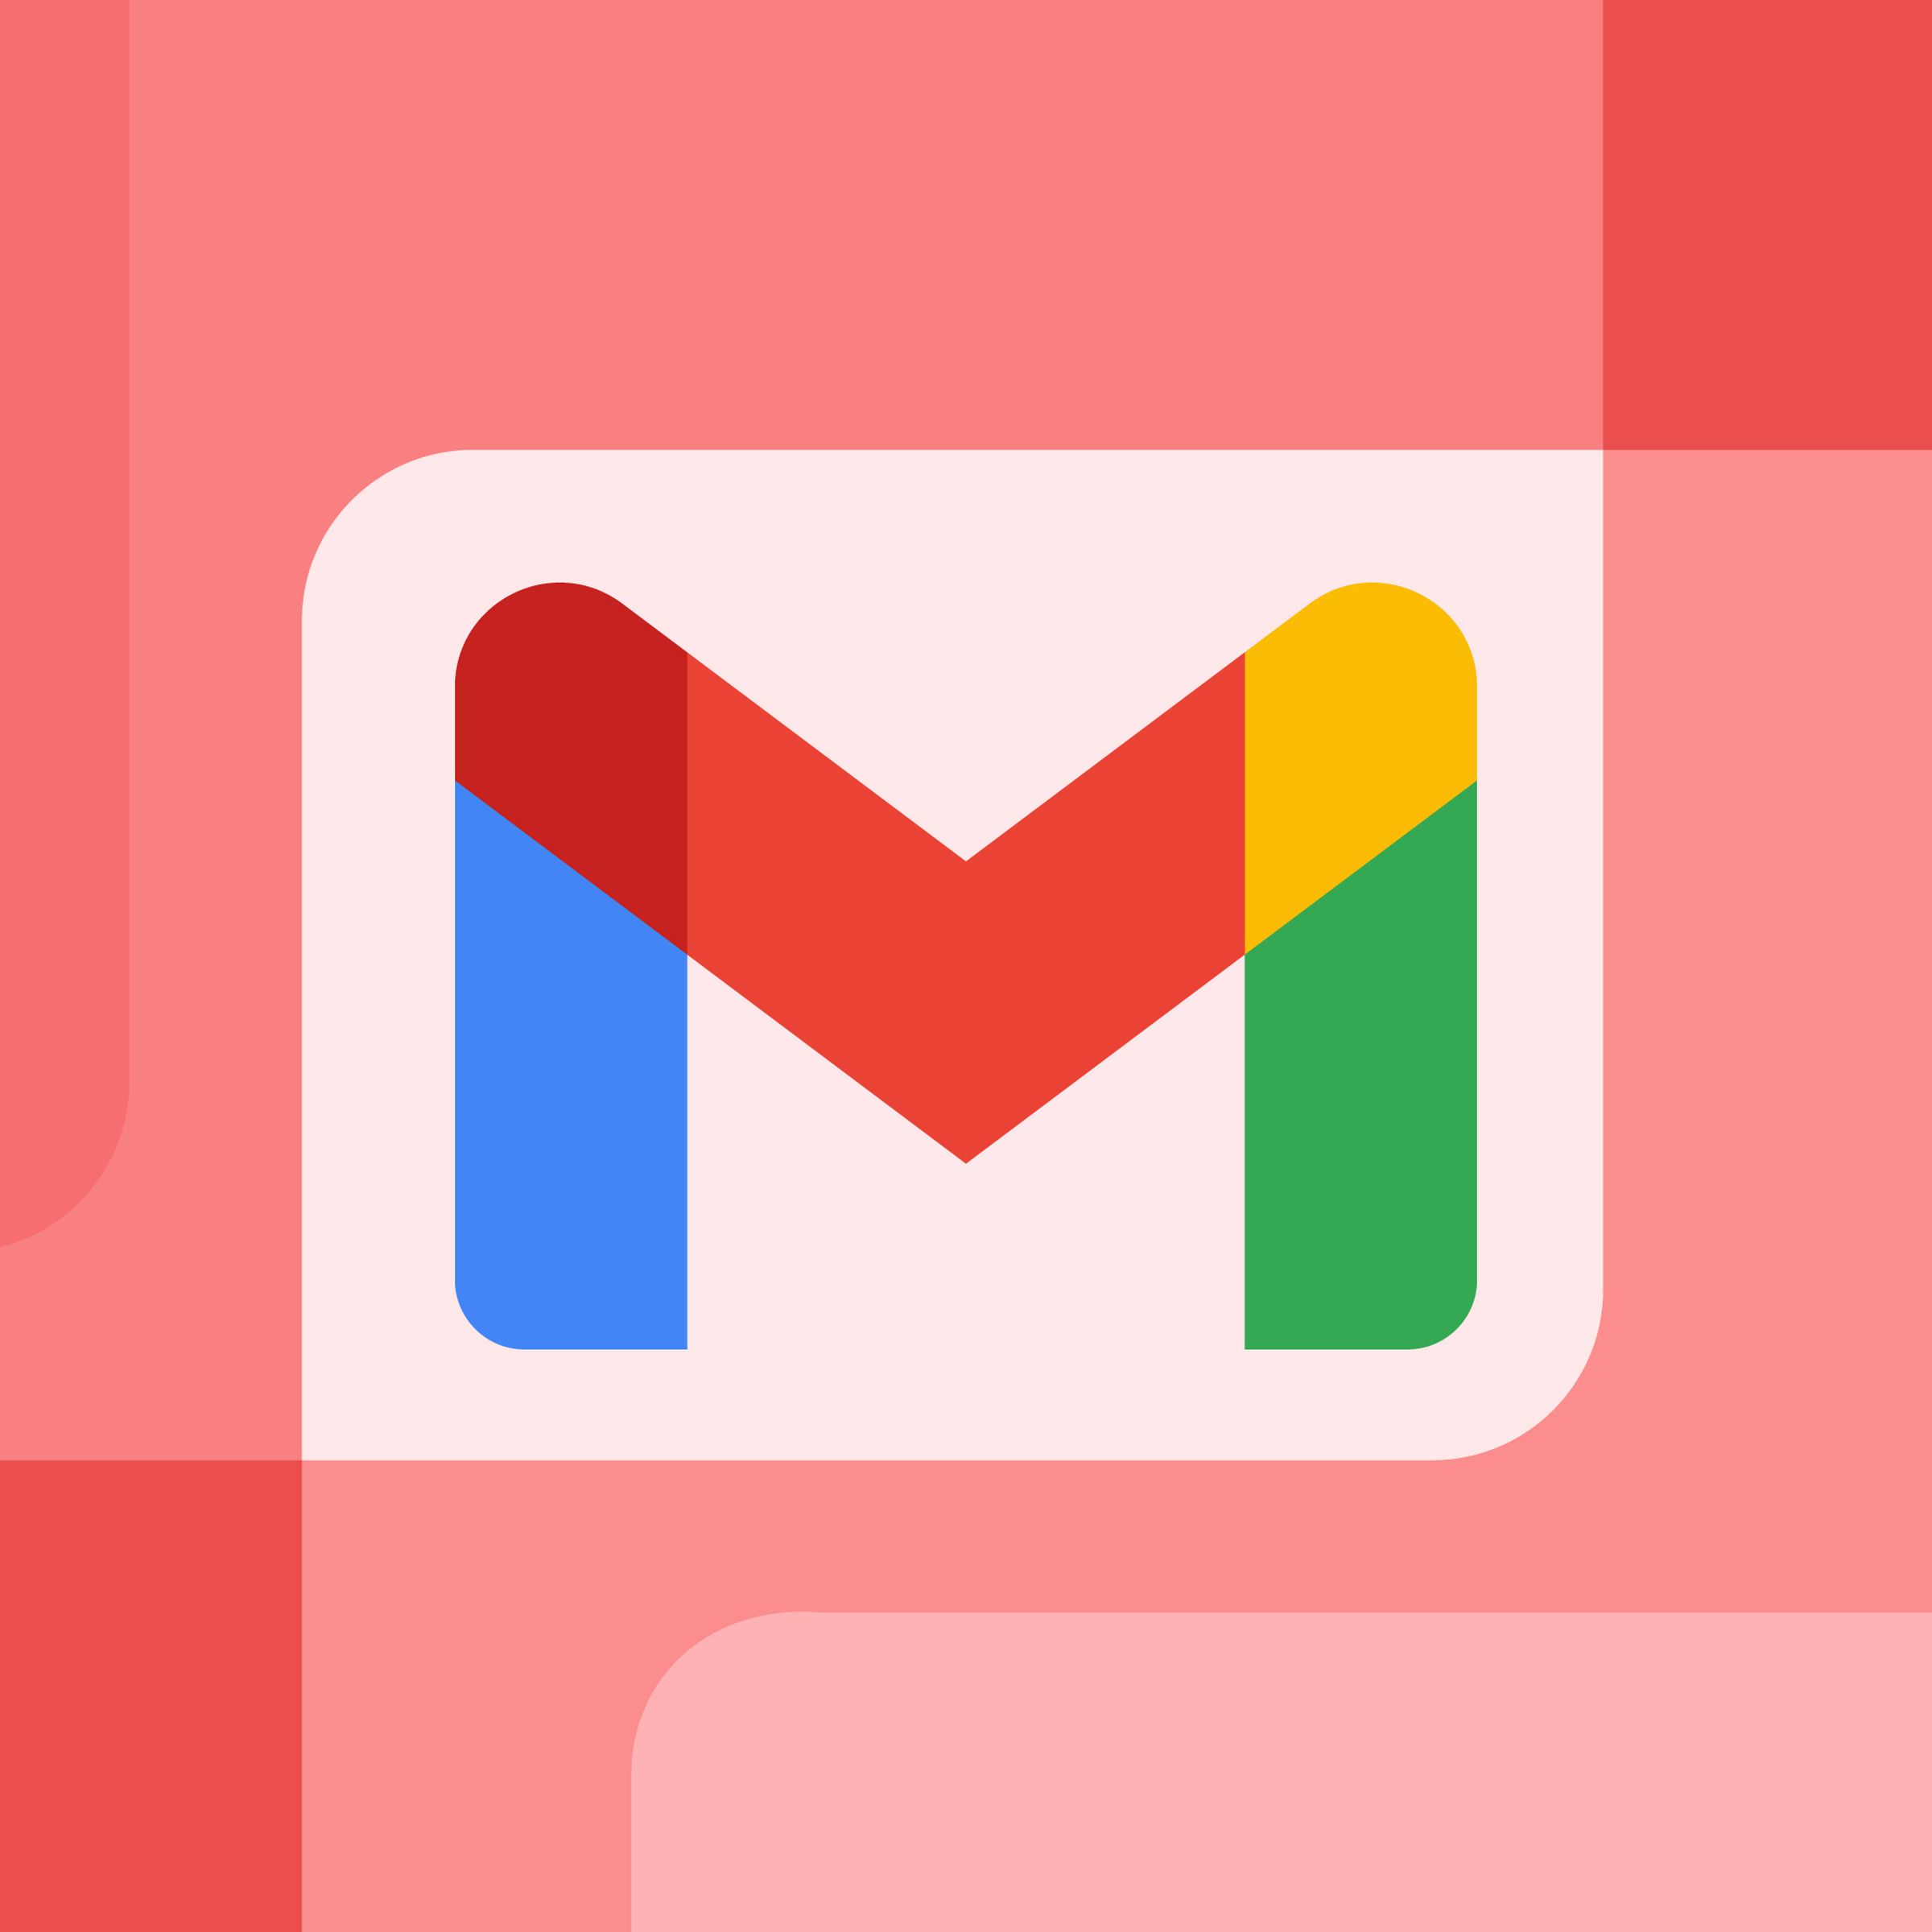 An illustration of the Gmail logo.